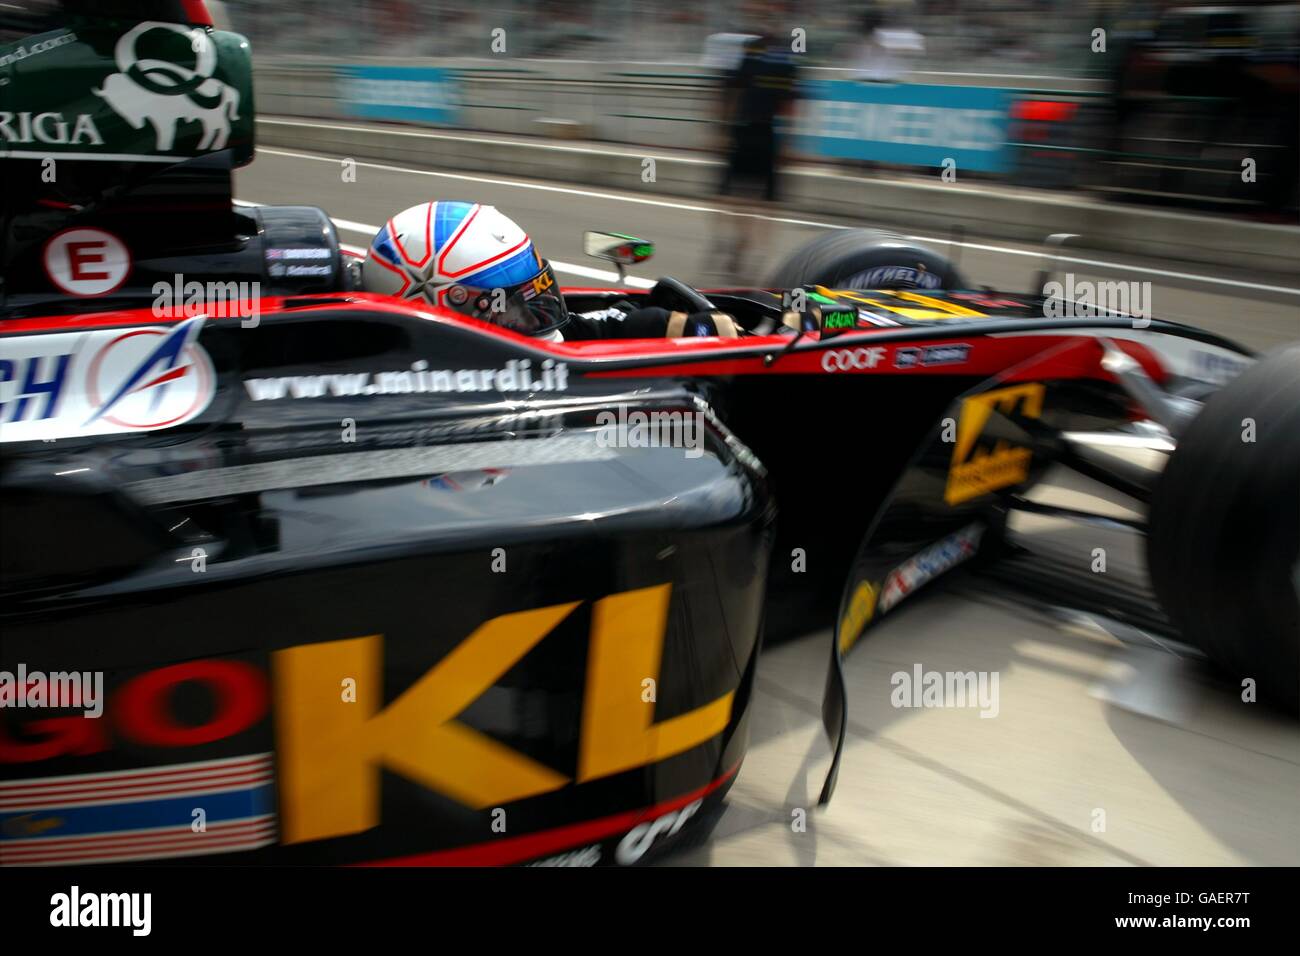 New British Minardi driver Anthony Davidson speeds out of the pits. His ...